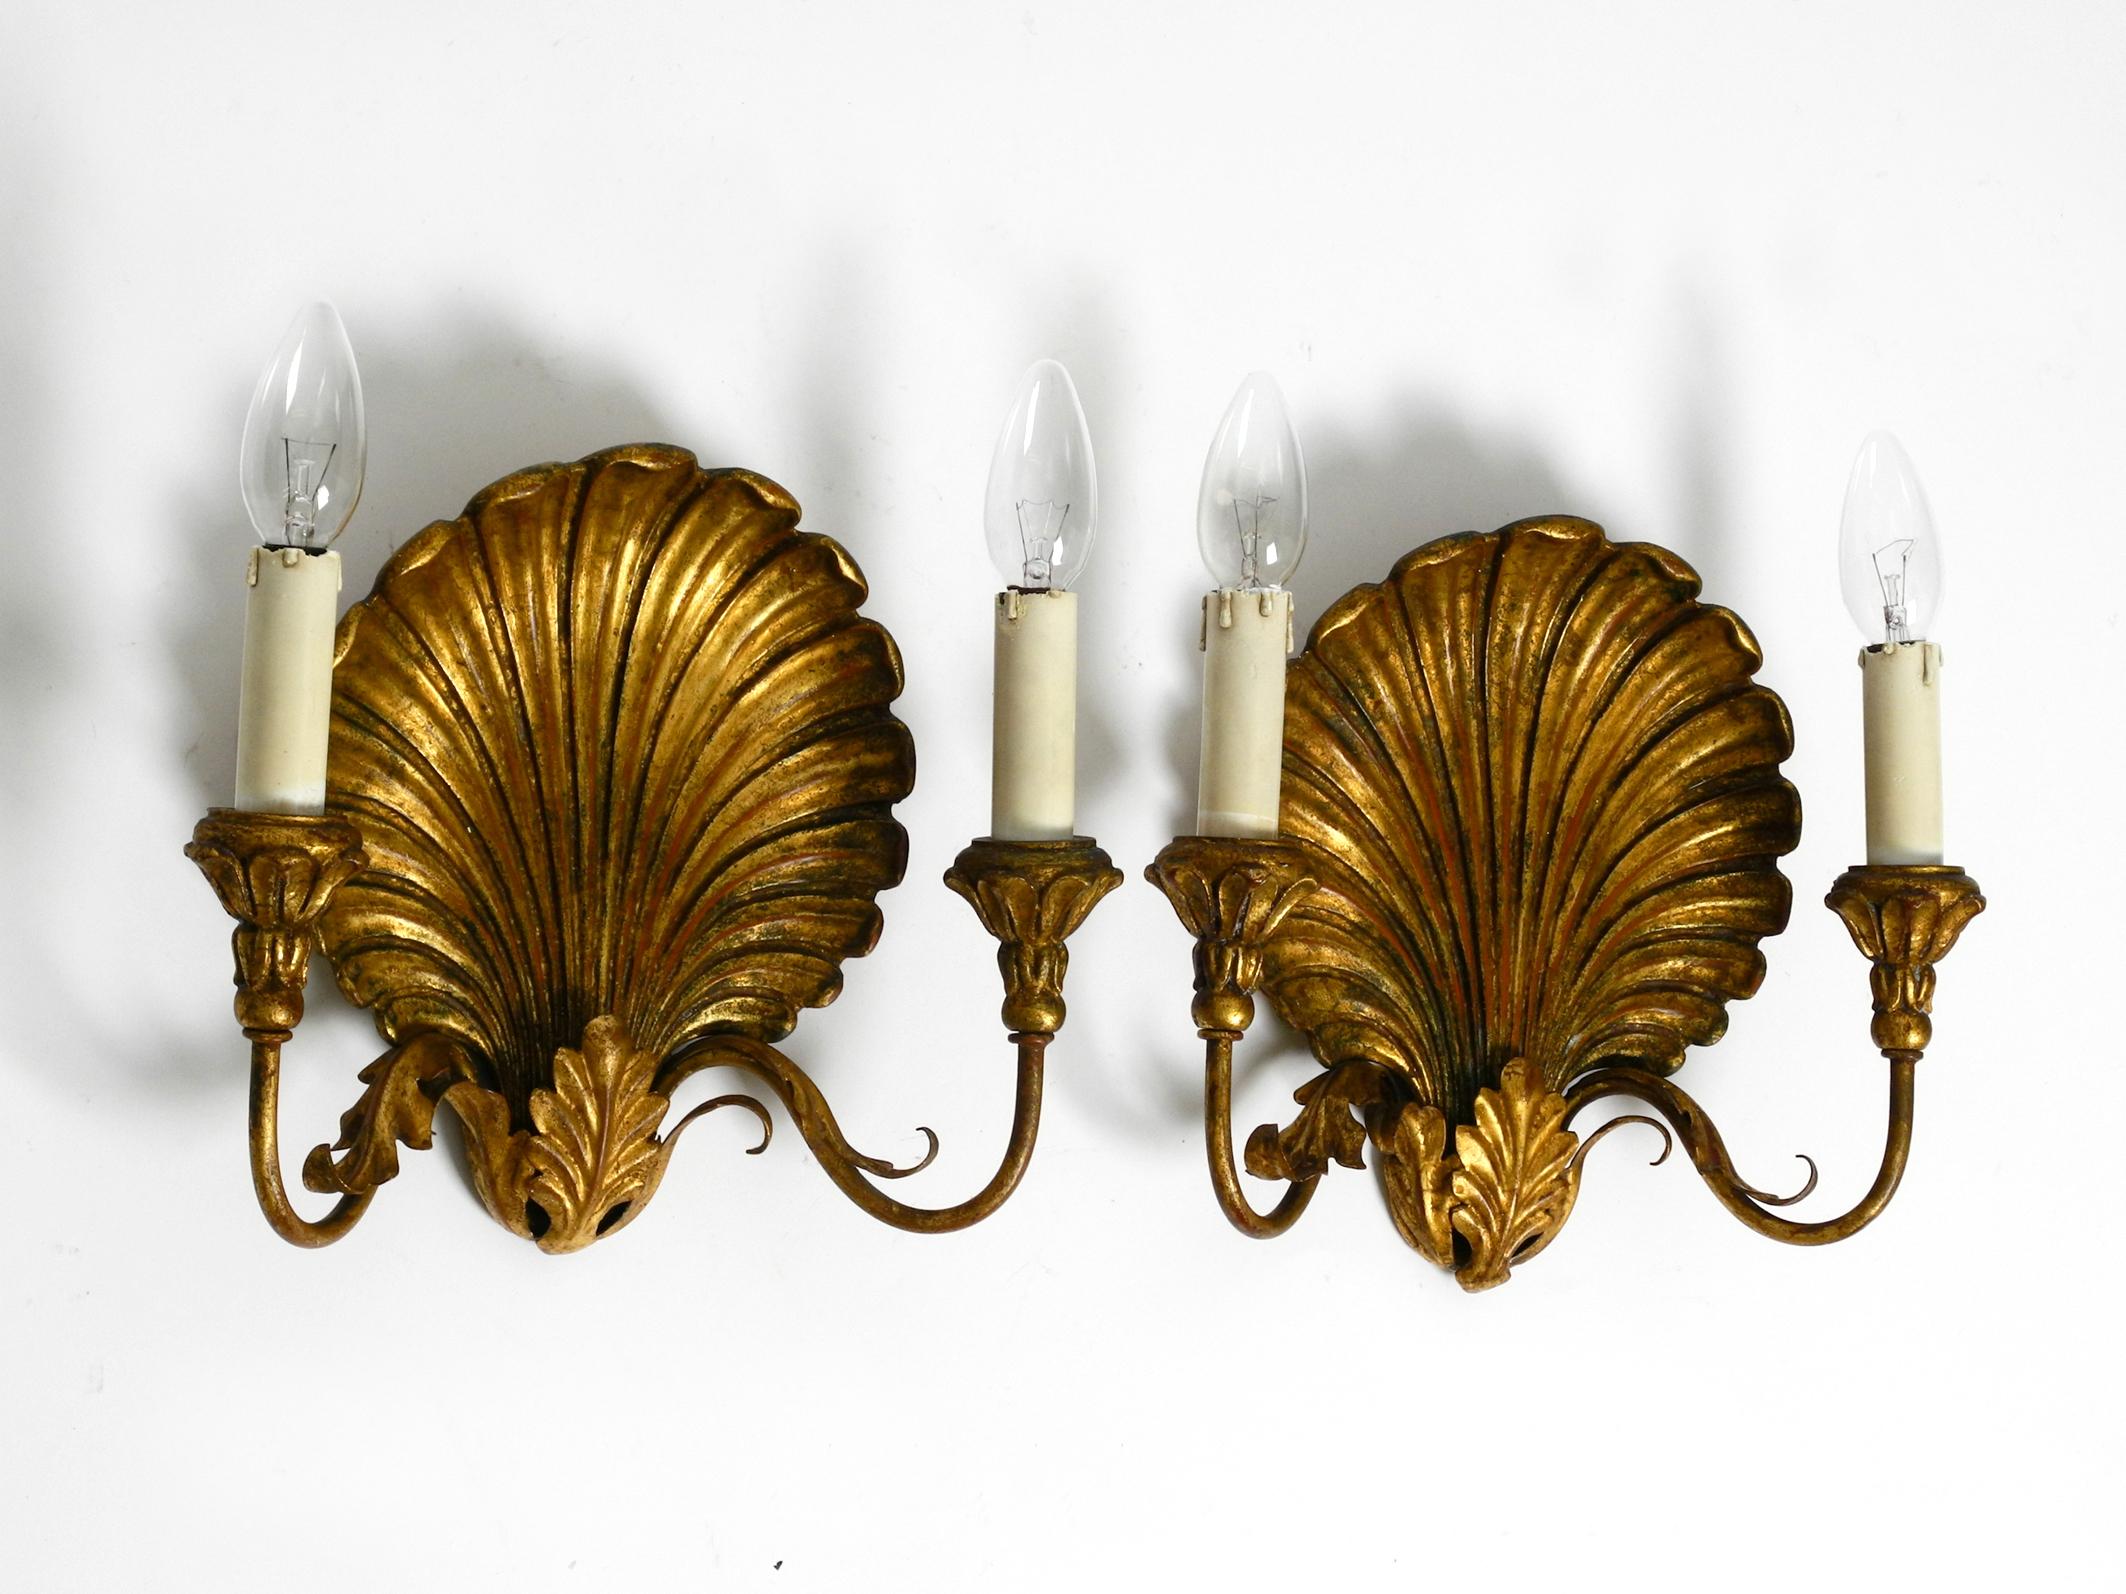 Pair of extravagant Italian large 2-armed Mid Century wall lamps by Palladio.
Palladio was an Italian manufacturer of high-quality lighting.
The original labels with the logo and date of manufacture are still on the back of both lamps. Made in Italy